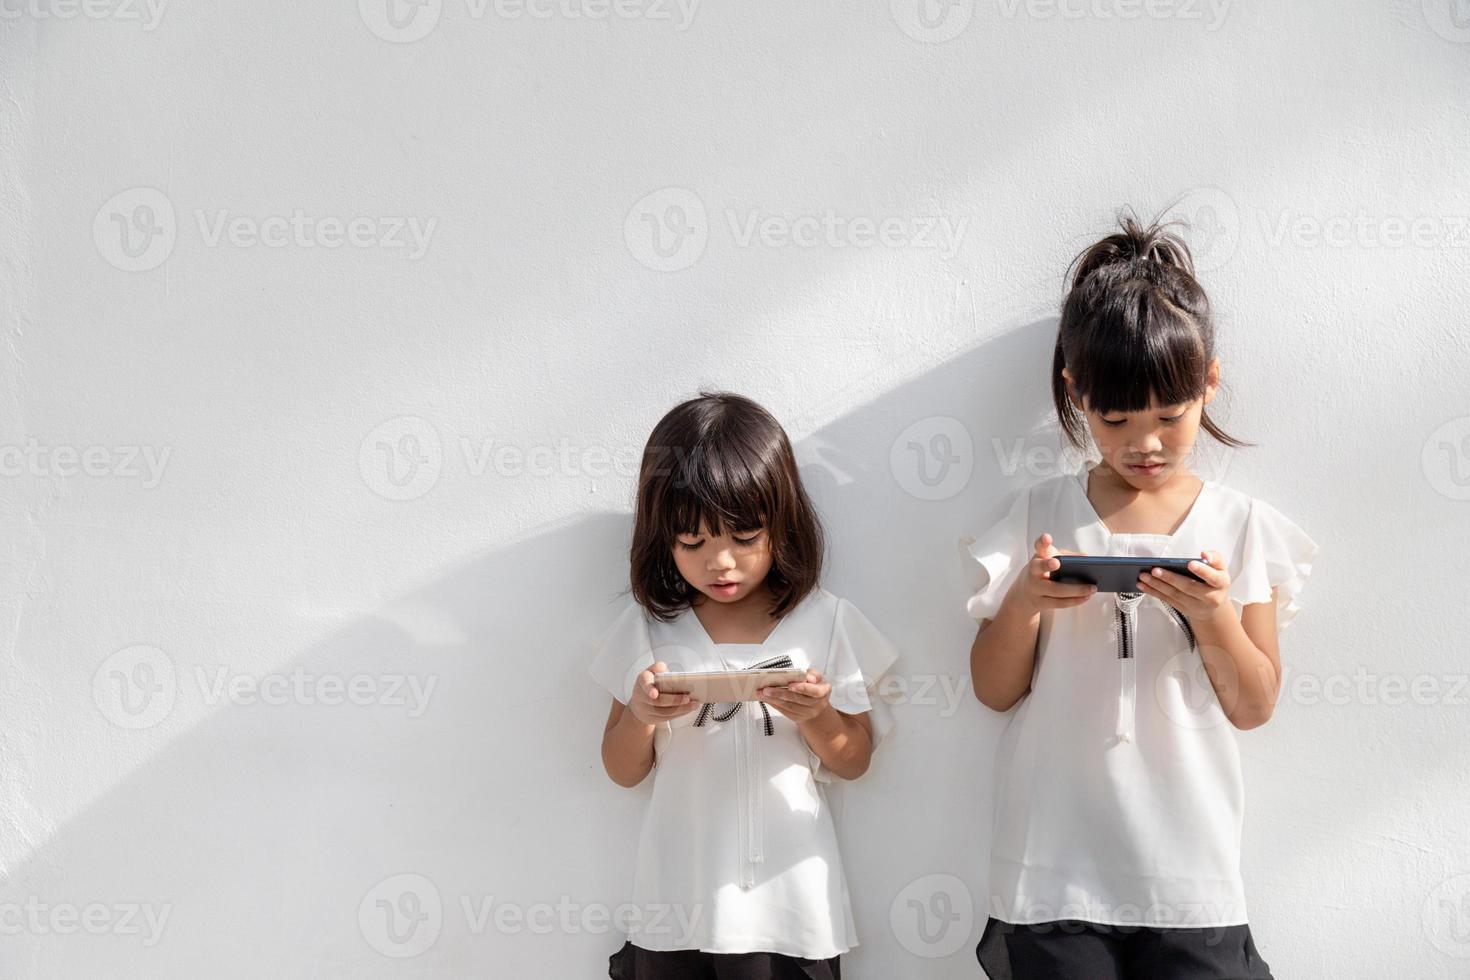 Sibling girls watching their smartphones on white background. Social concept about new technology people addiction photo